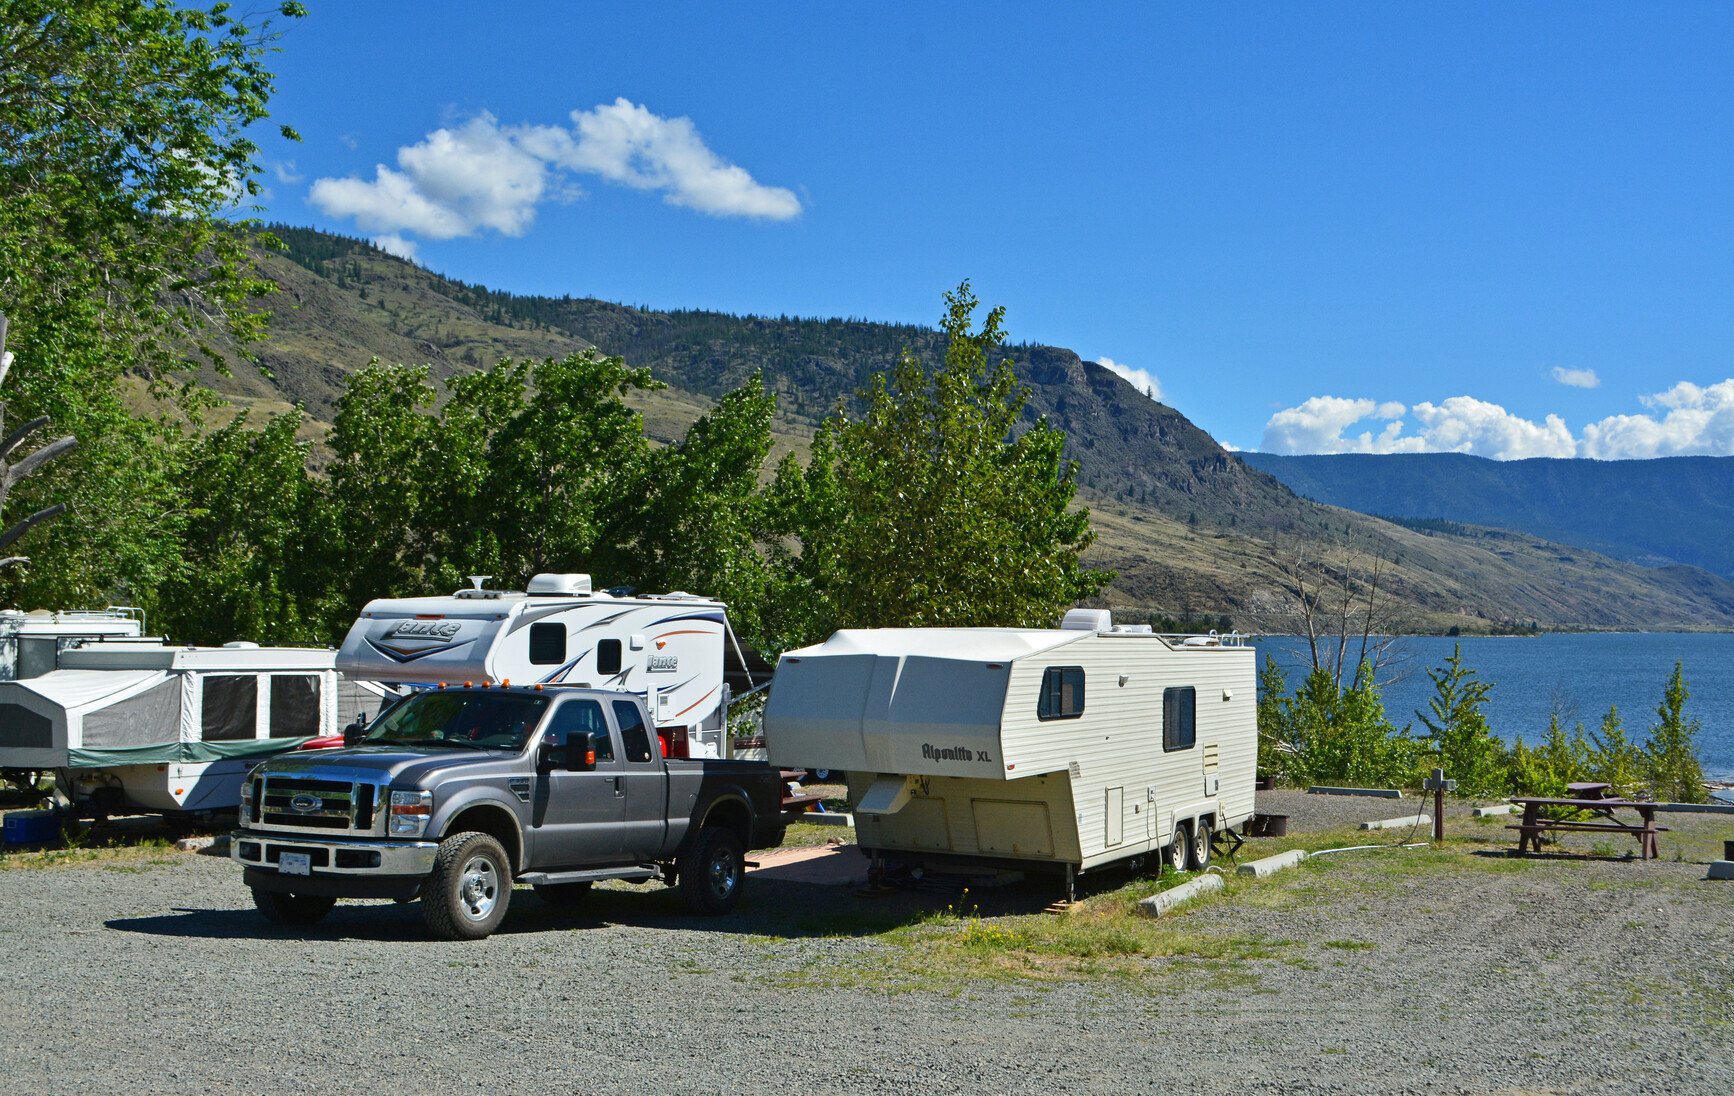 Kamloops Lake - Campground with truck, trailers, tent trailers and power hook up. Picnic tables on the right and trees, lake and mountains in the background.